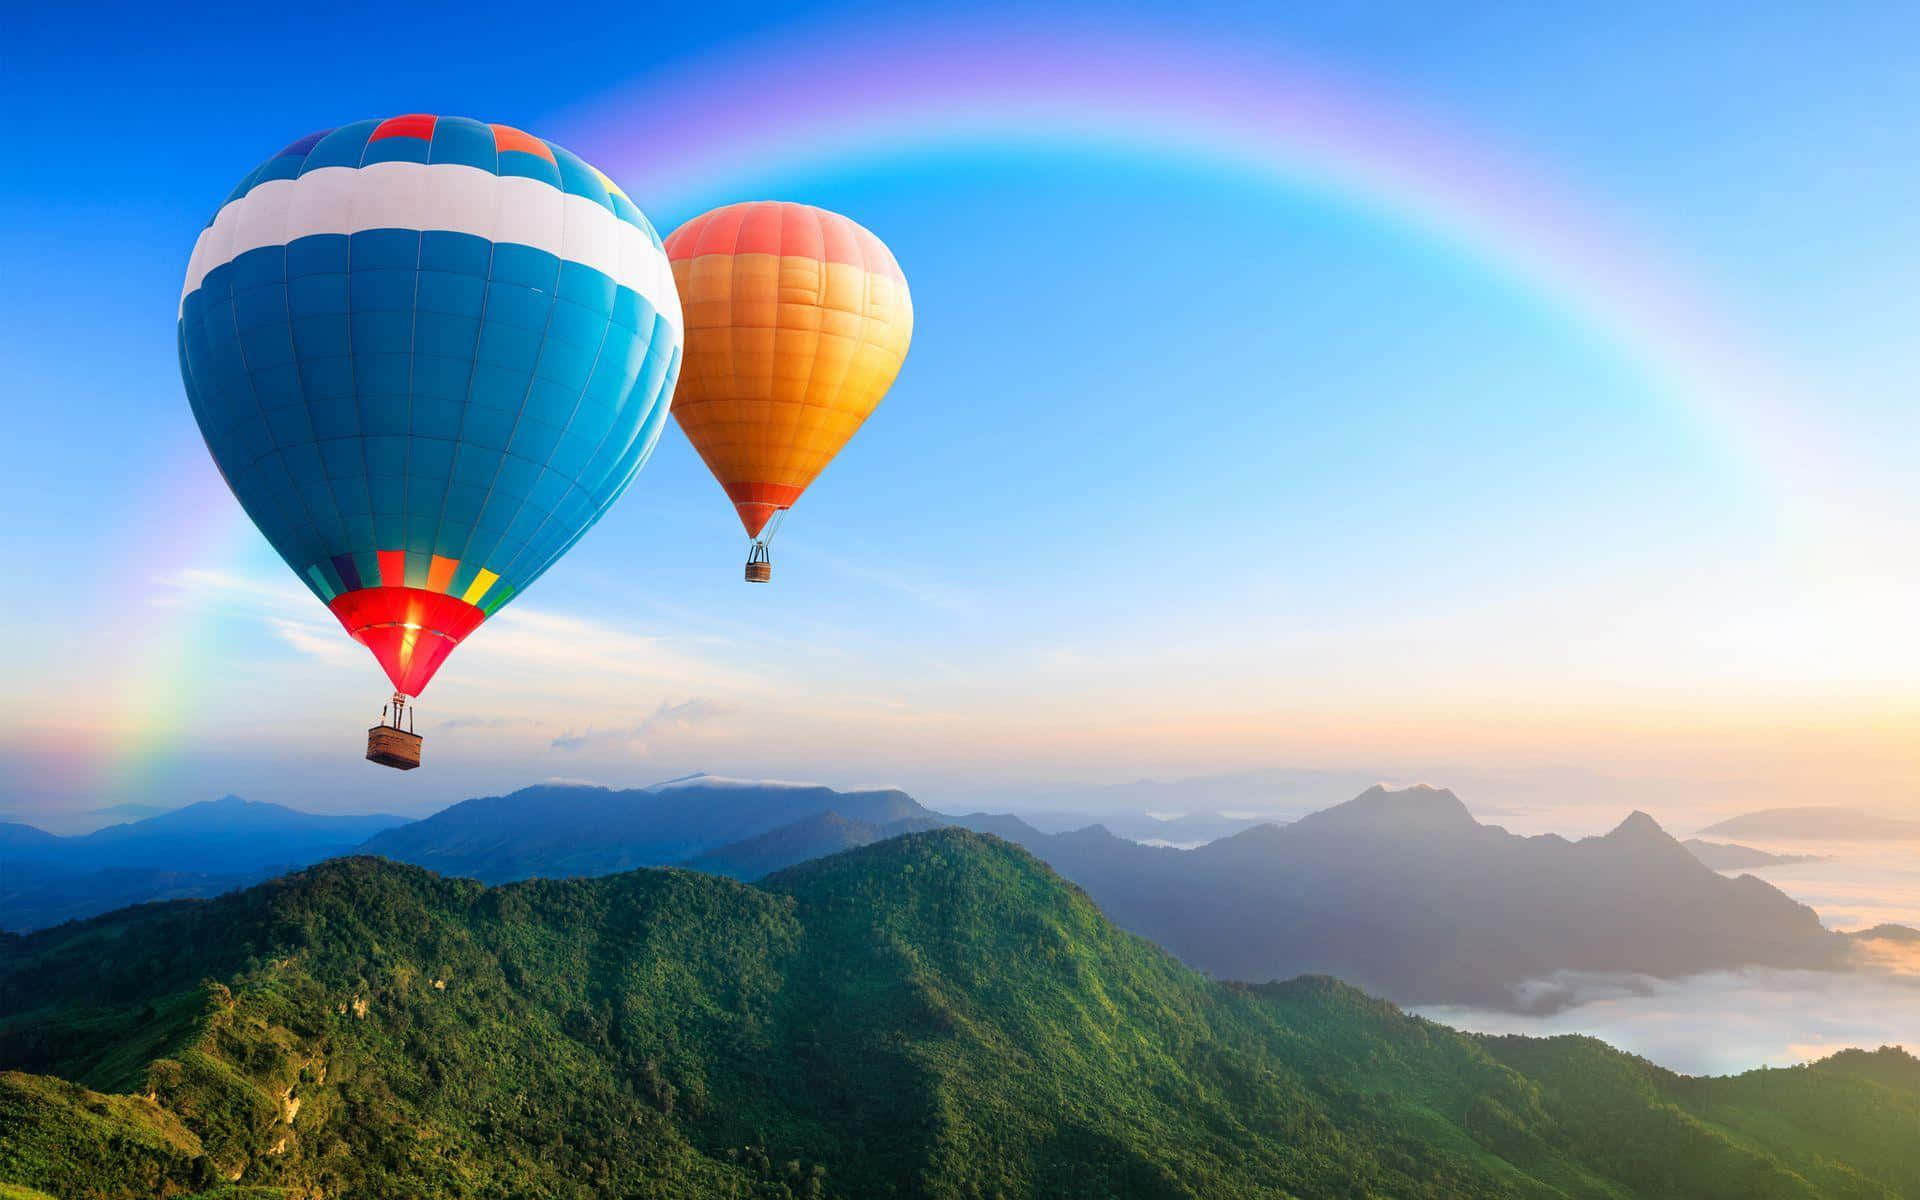 Taking in the gorgeous views while floating above the world in a hot air balloon